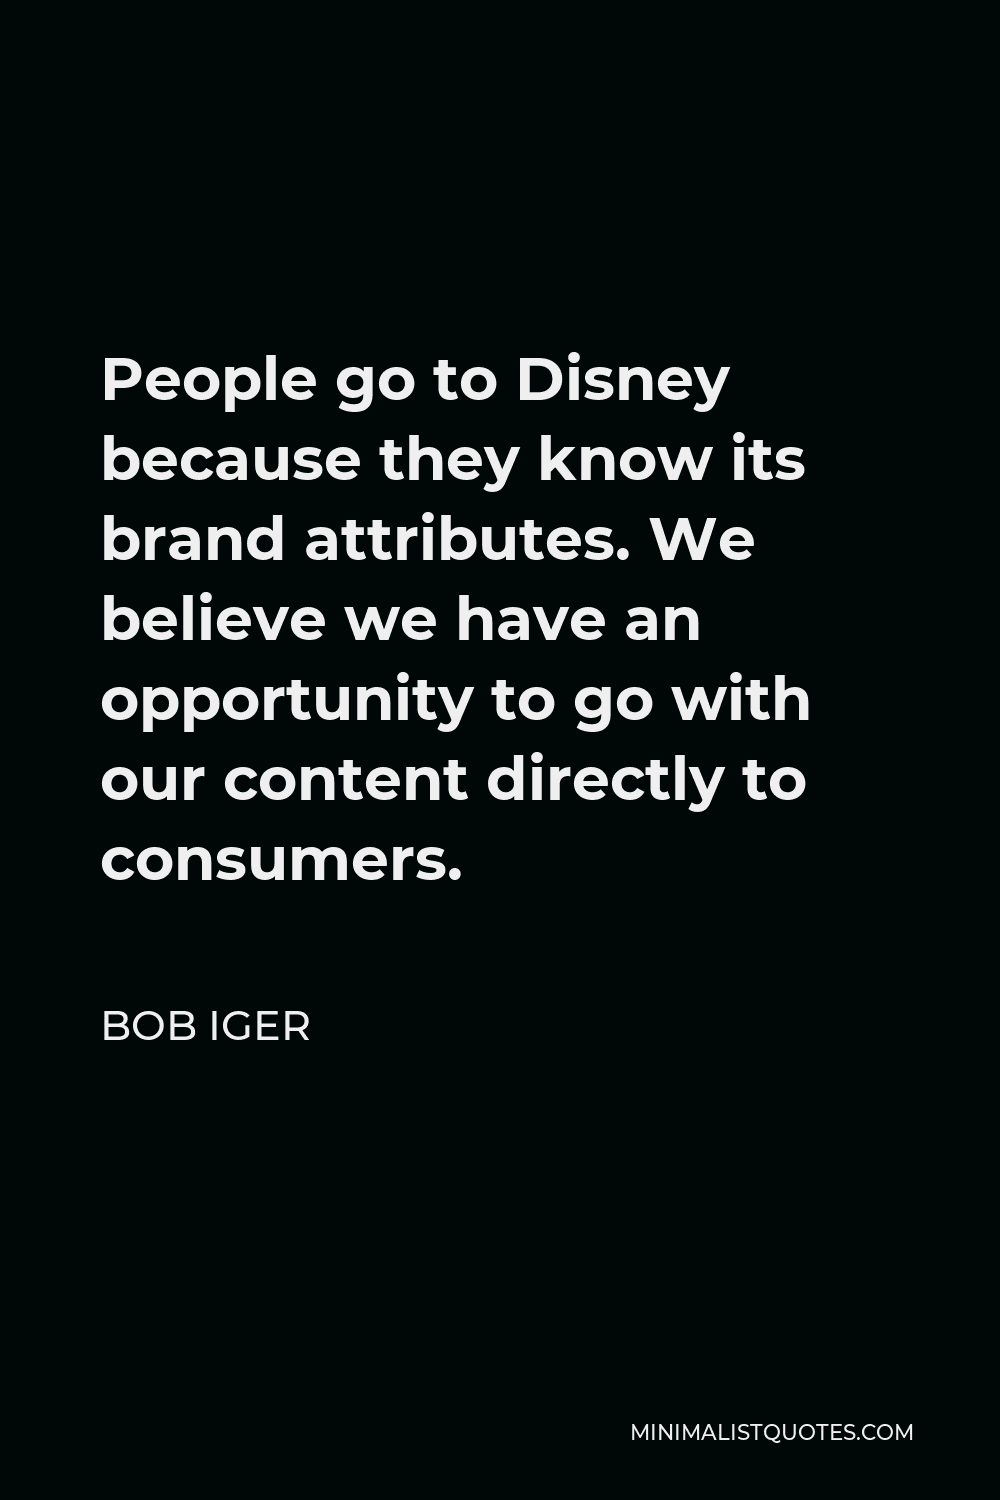 Bob Iger Quote - People go to Disney because they know its brand attributes. We believe we have an opportunity to go with our content directly to consumers.